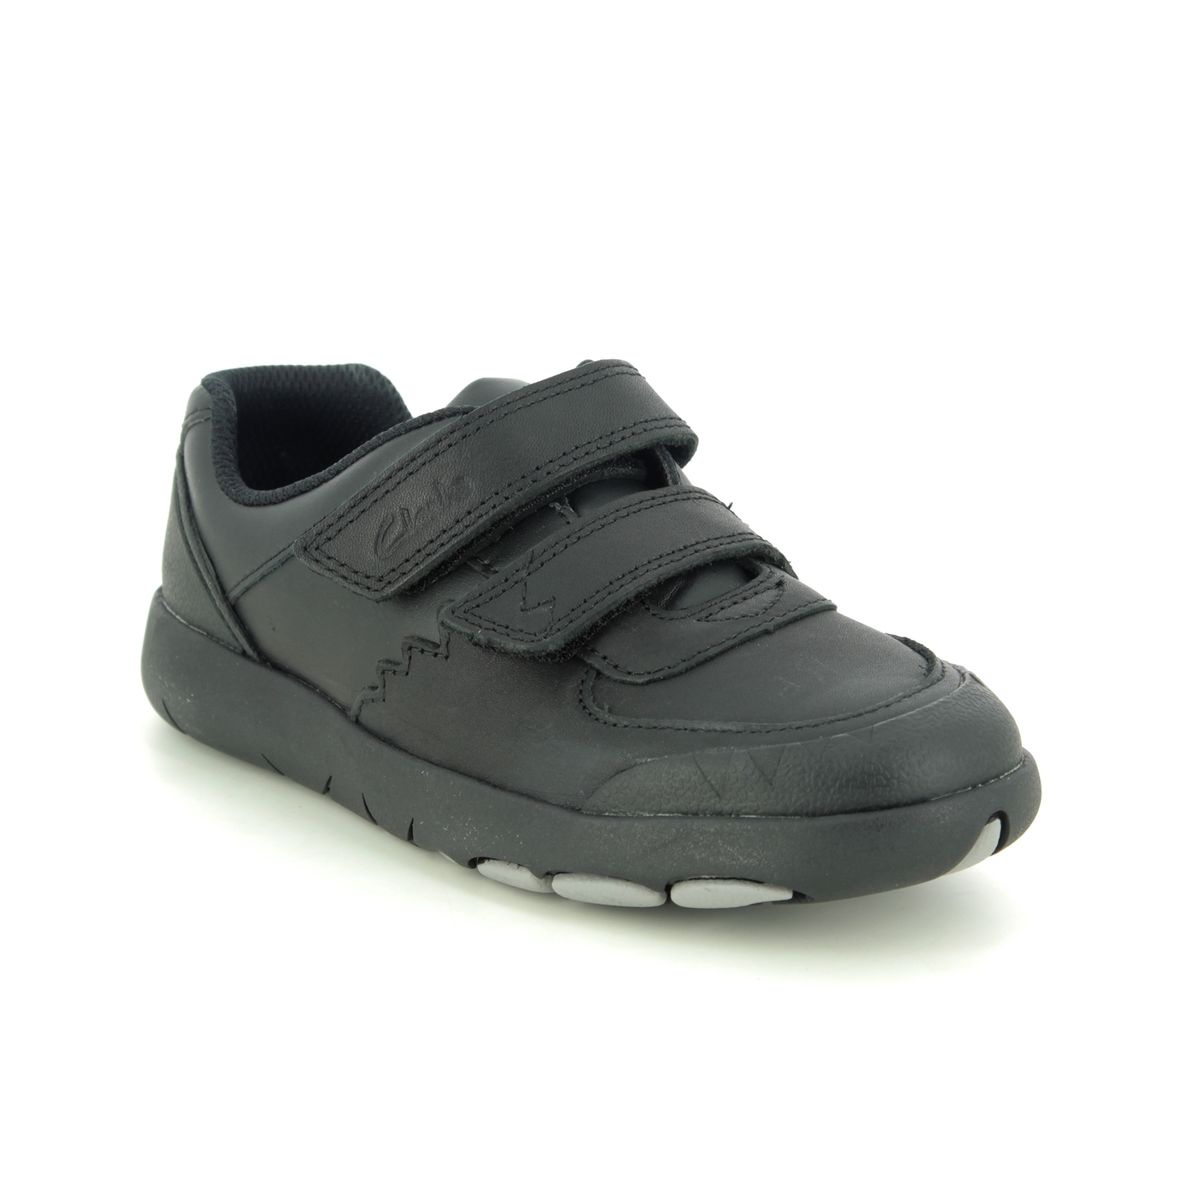 Clarks Rex Pace K Black leather Kids Boys Shoes 4704-45E in a Plain Leather in Size 12.5